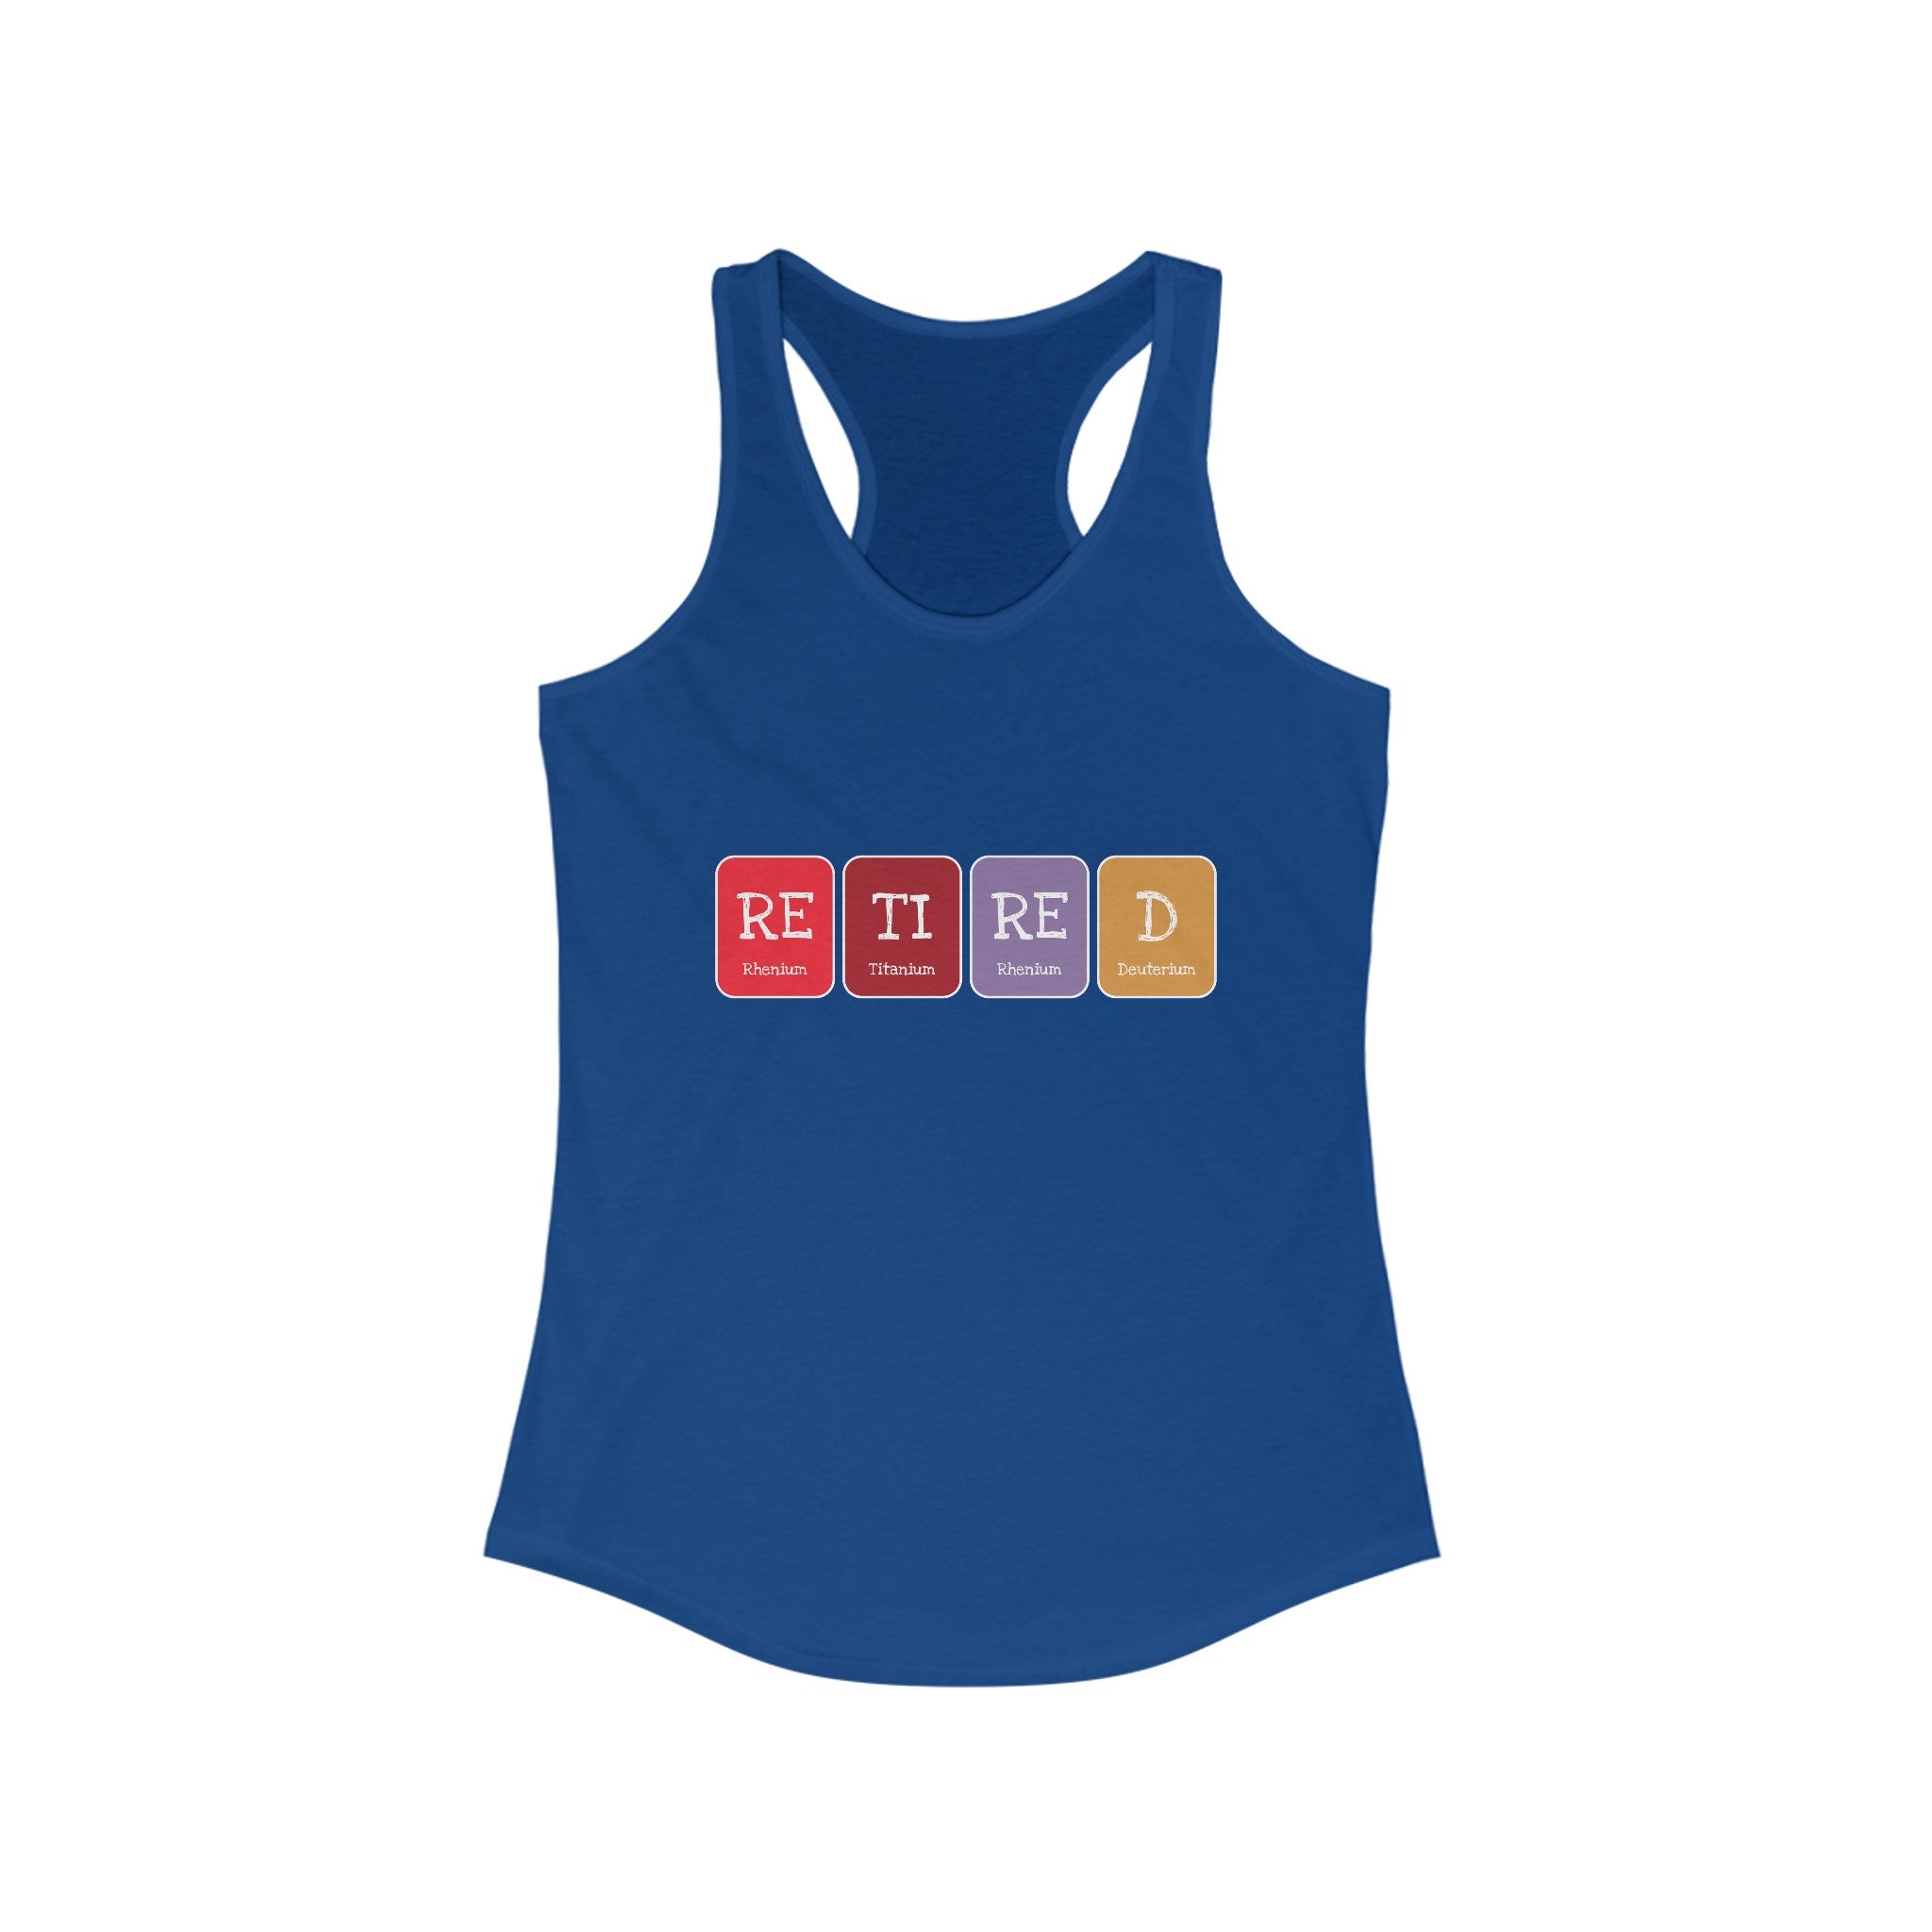 Retired - Women's Racerback Tank with an active style, featuring a design that spells out "RETIRED" using periodic table element symbols (Rhenium, Titanium, Tellurium, Dubnium). Lightweight and perfect for any casual outing.